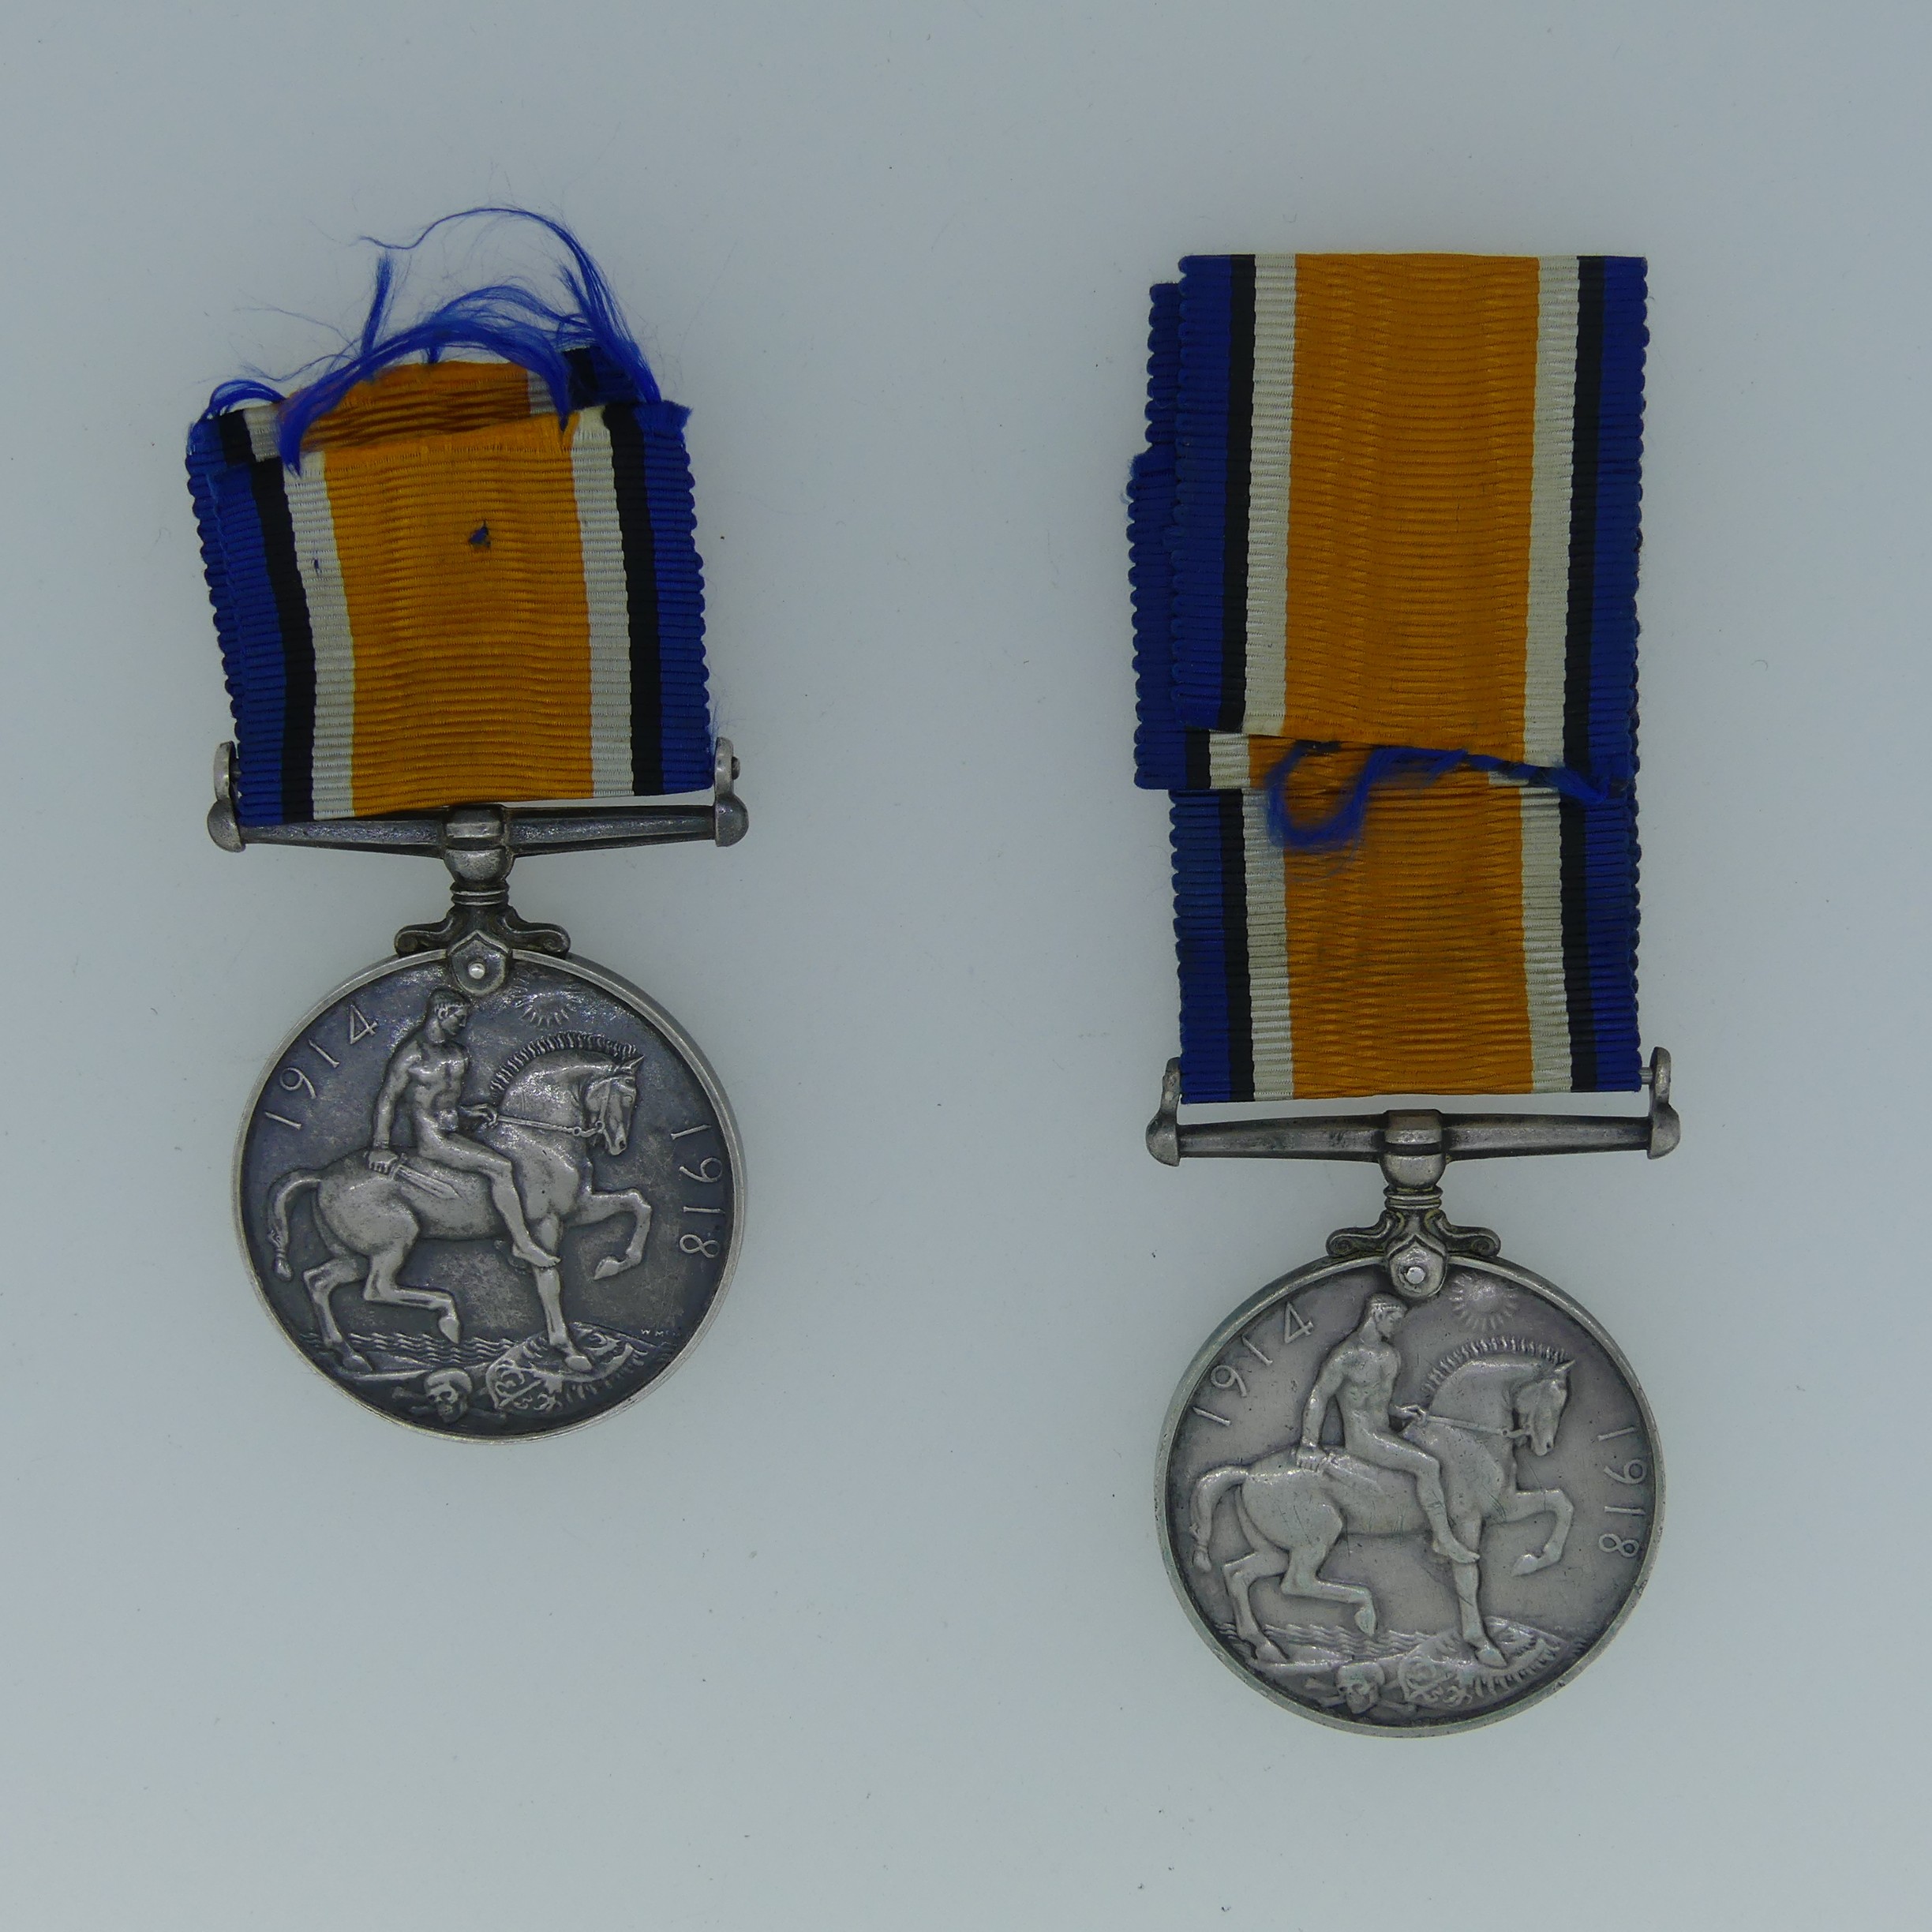 British War Medals (2) 25424 Pte. W. Gibbons Scottish Rifles and 20863 Pte. R. M. Bell Scottish - Image 2 of 4